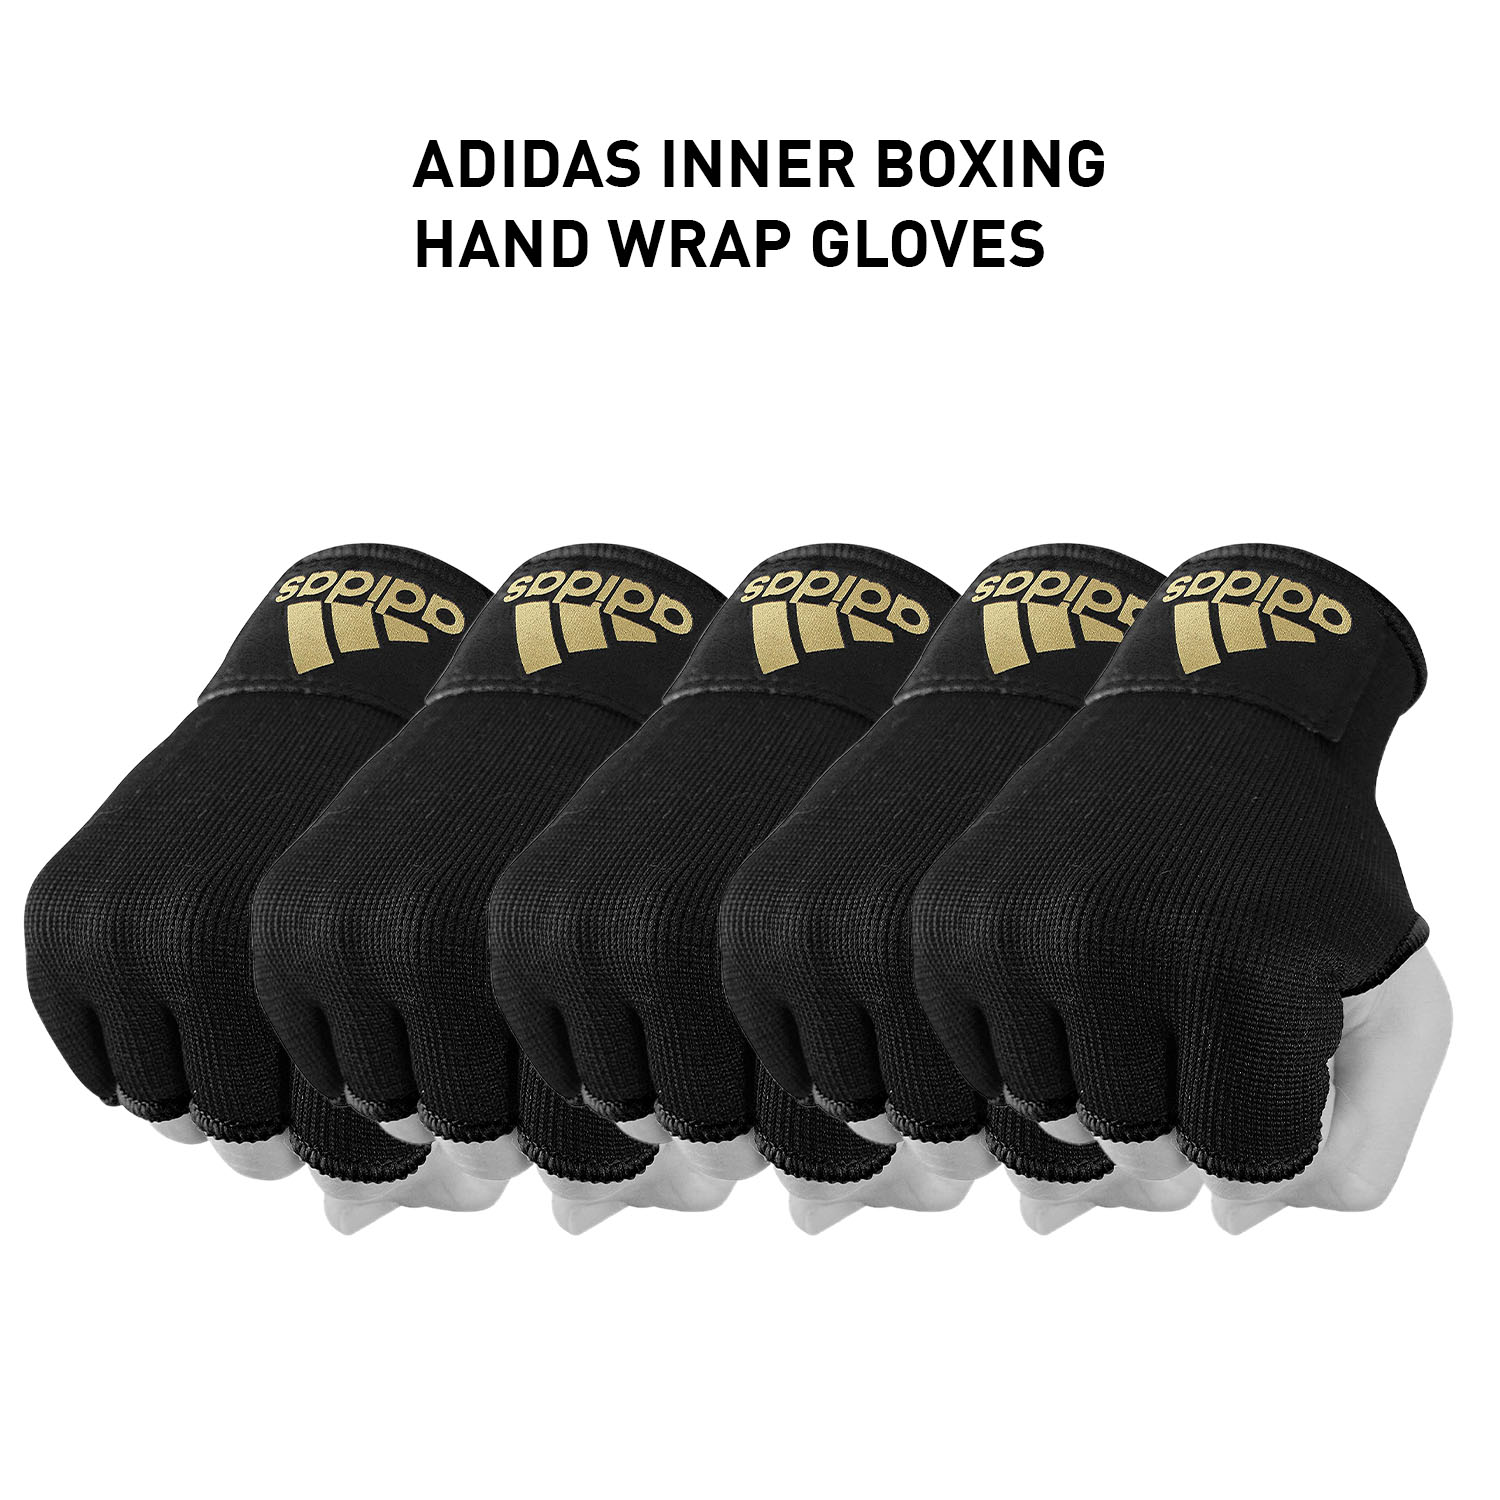 adidas Inner Boxing Hand Wrap Gloves – Pack of 5 pairs Bundle Deal